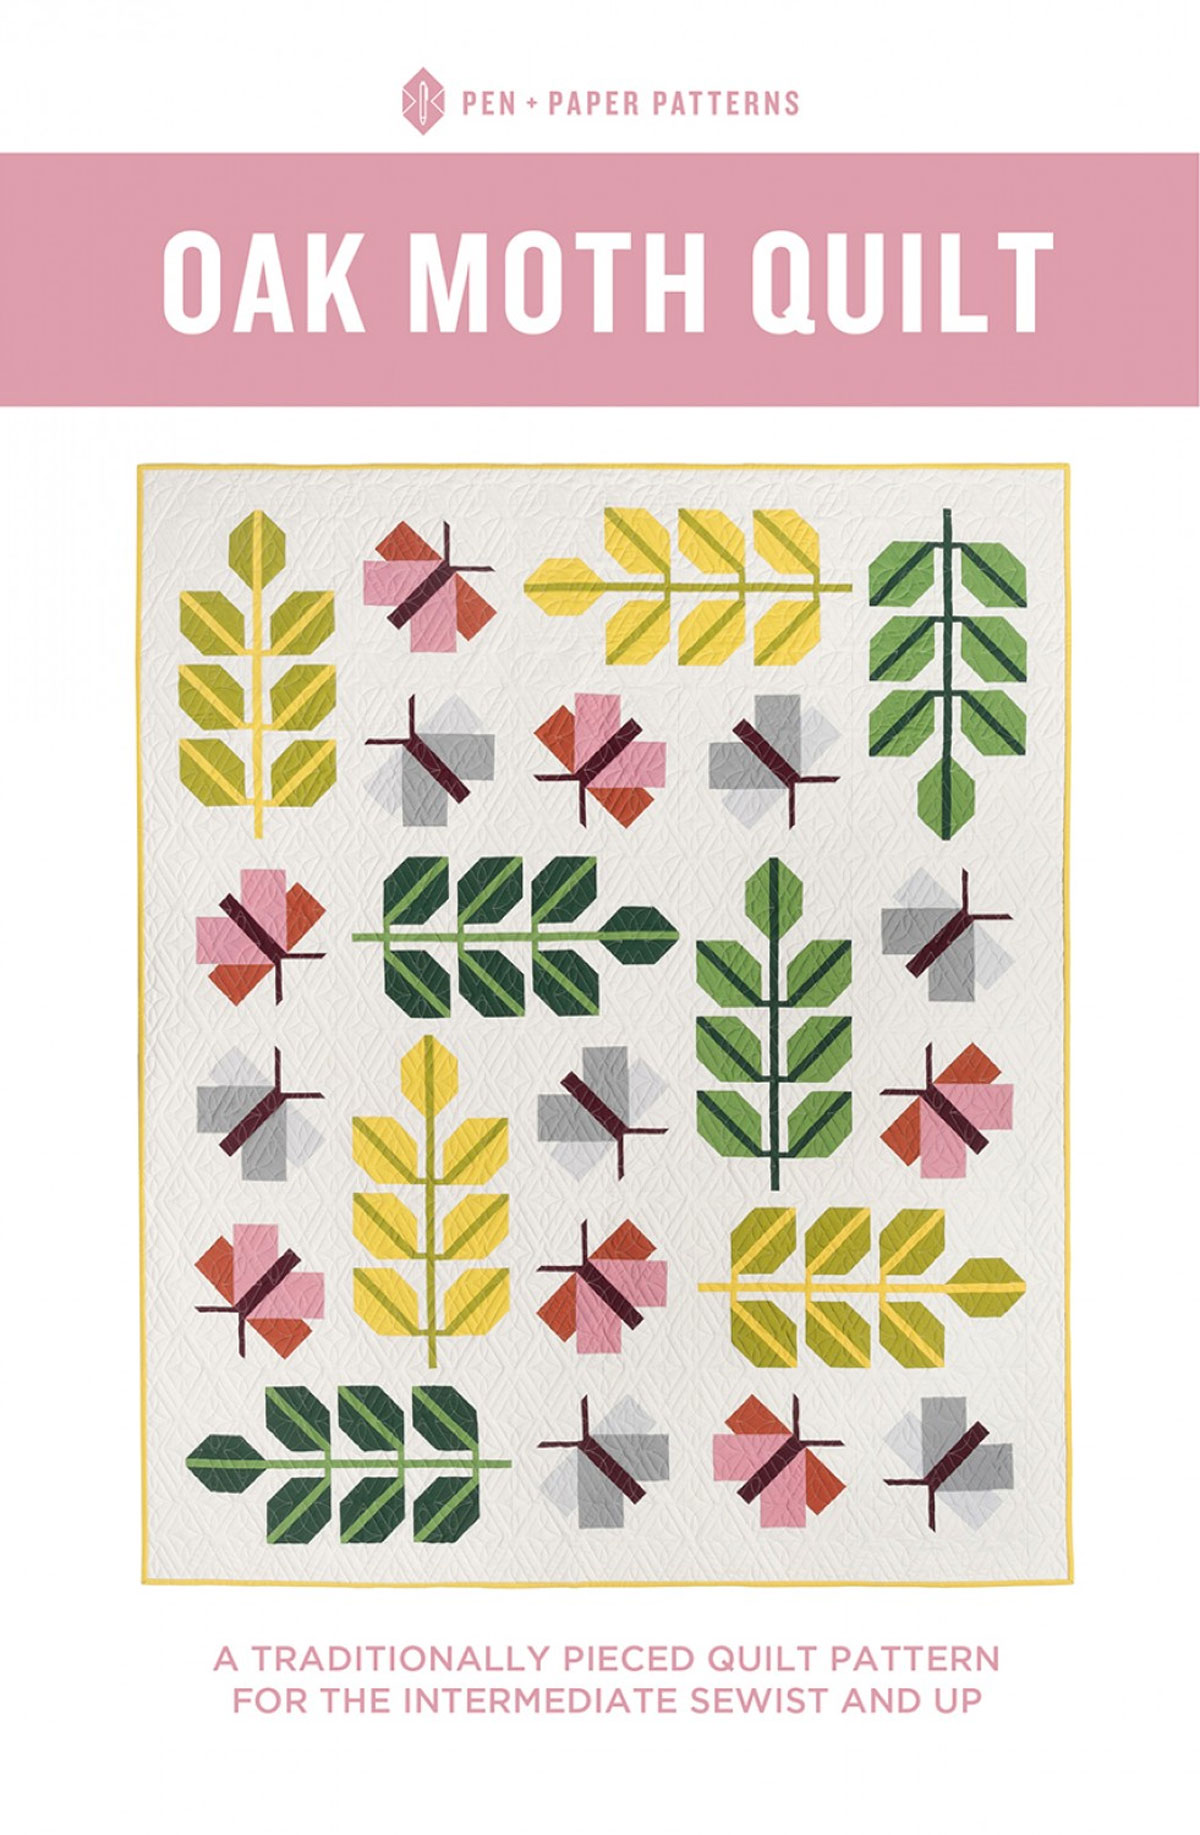 Oak-Moth-quilt-sewing-pattern-from-Pen-plus-paper-patterns-front